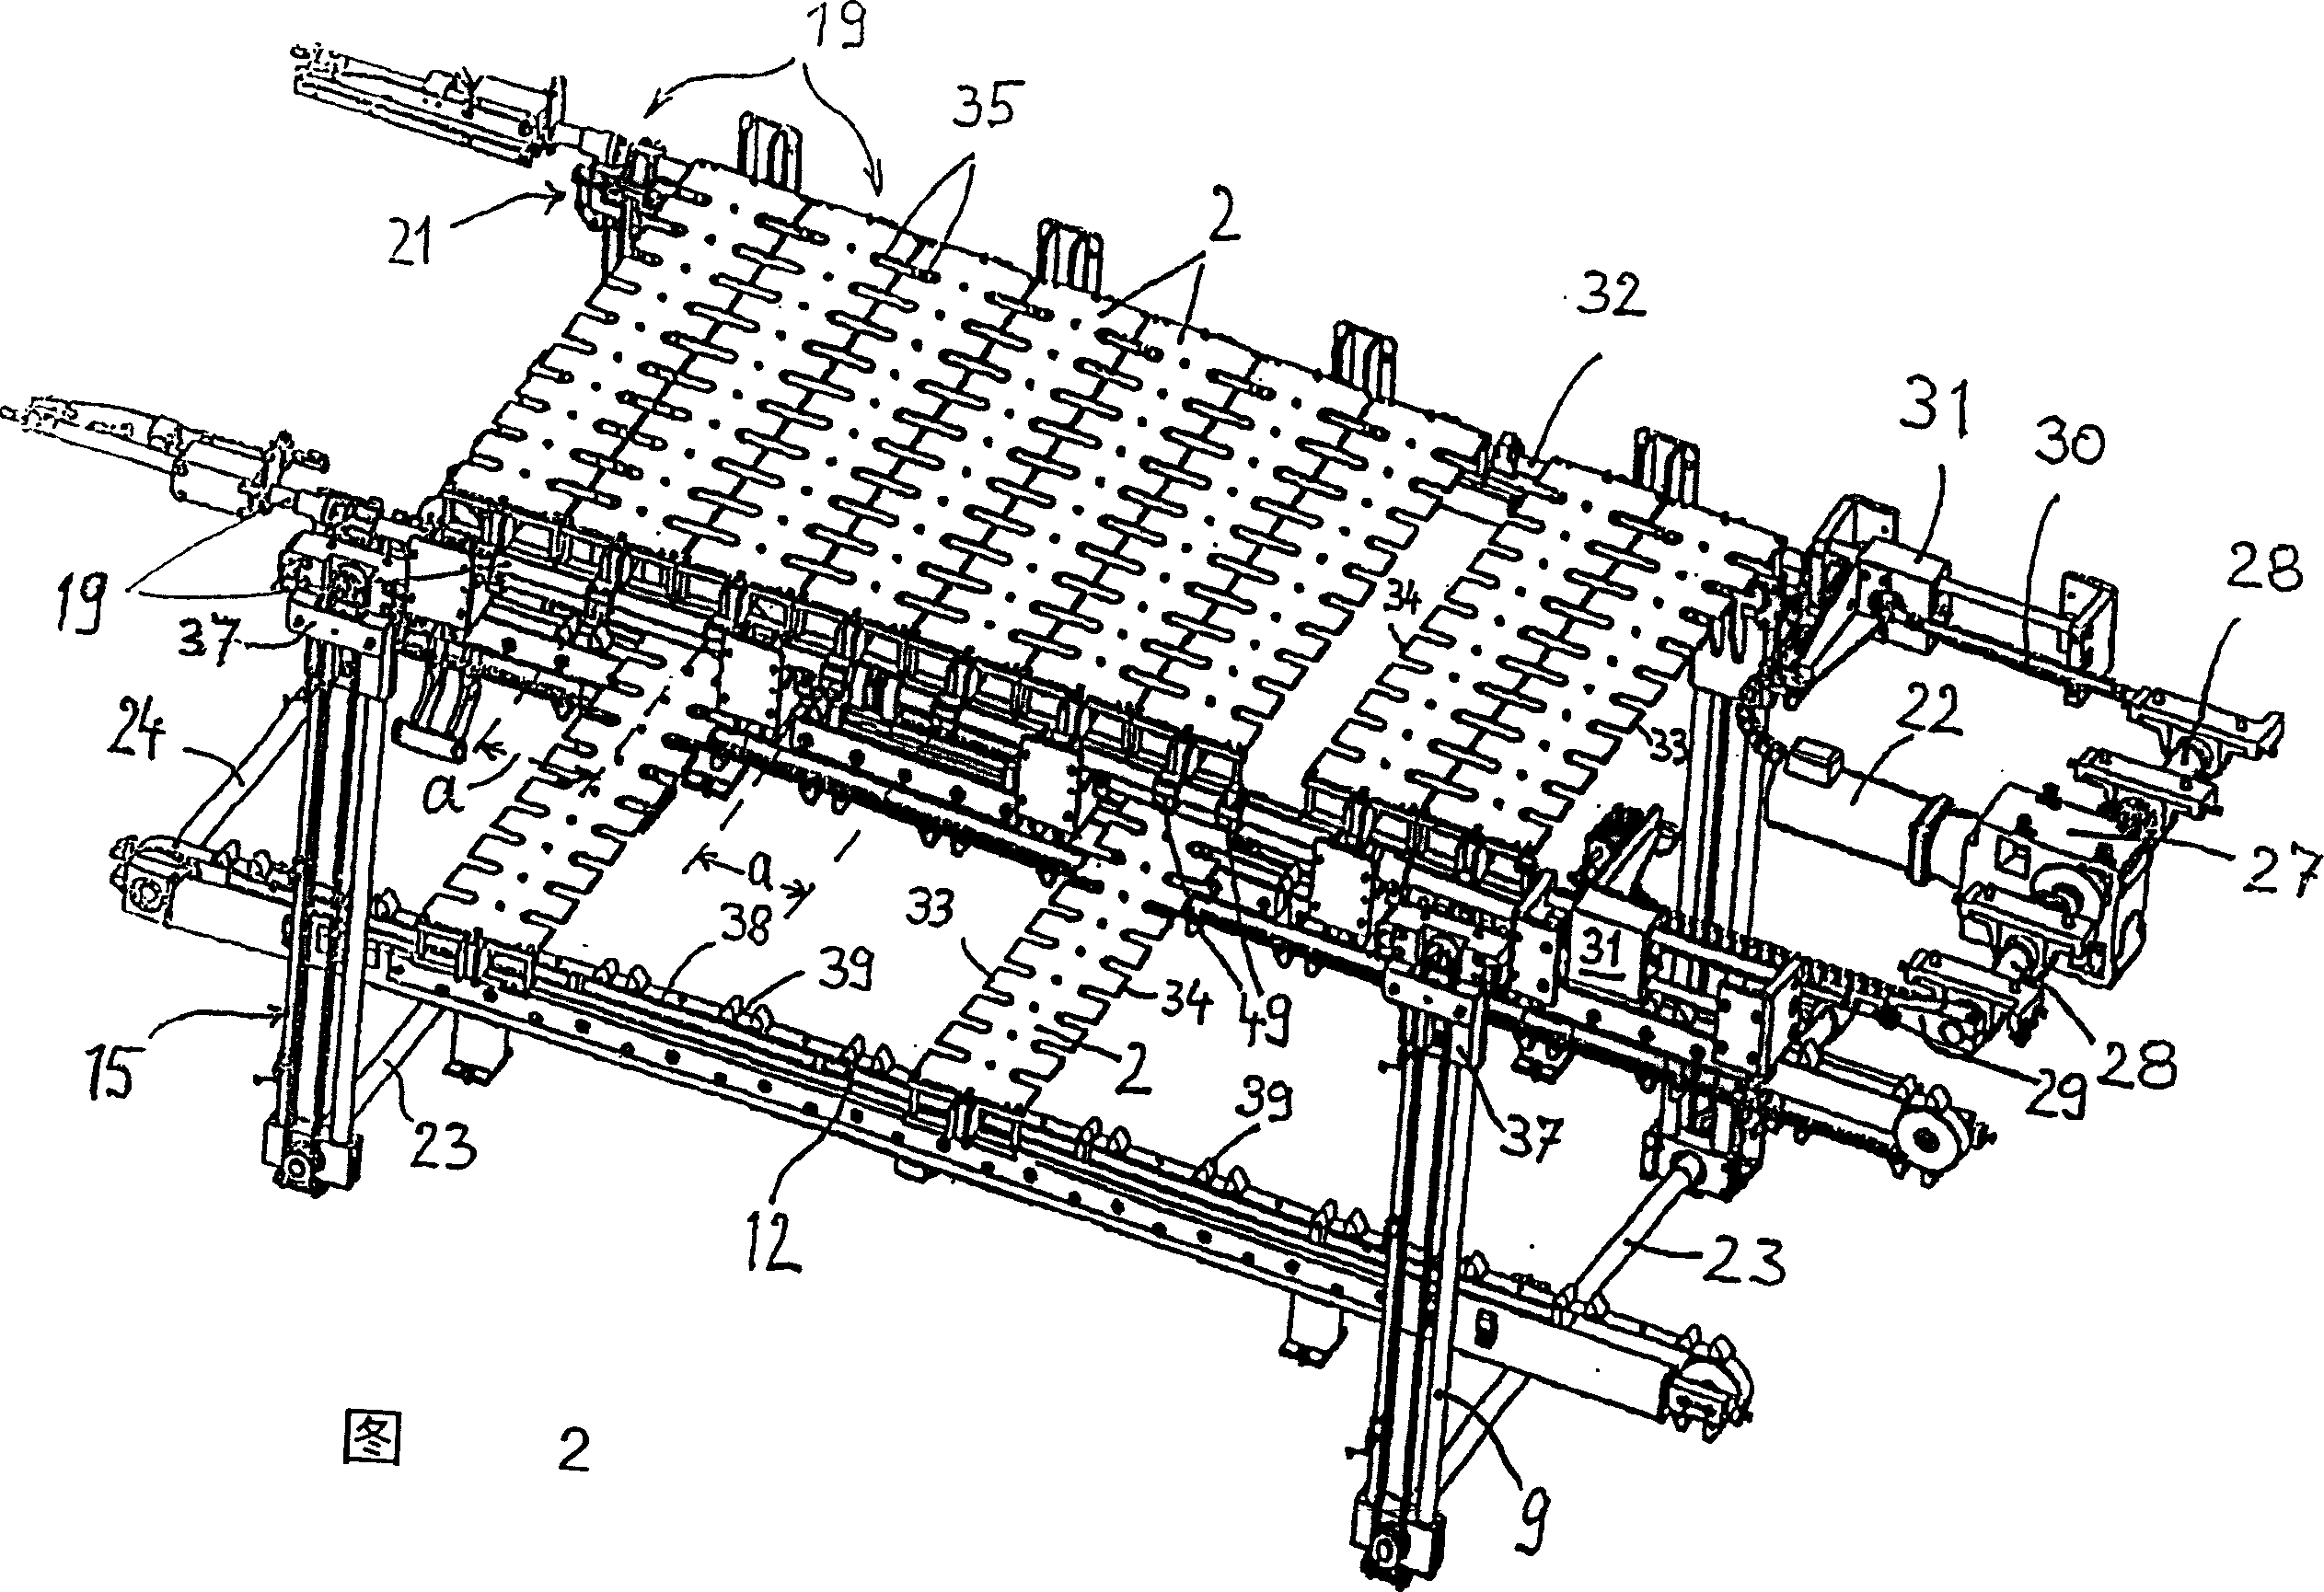 Device for filling bottle-shaped packaging in sterile conditions